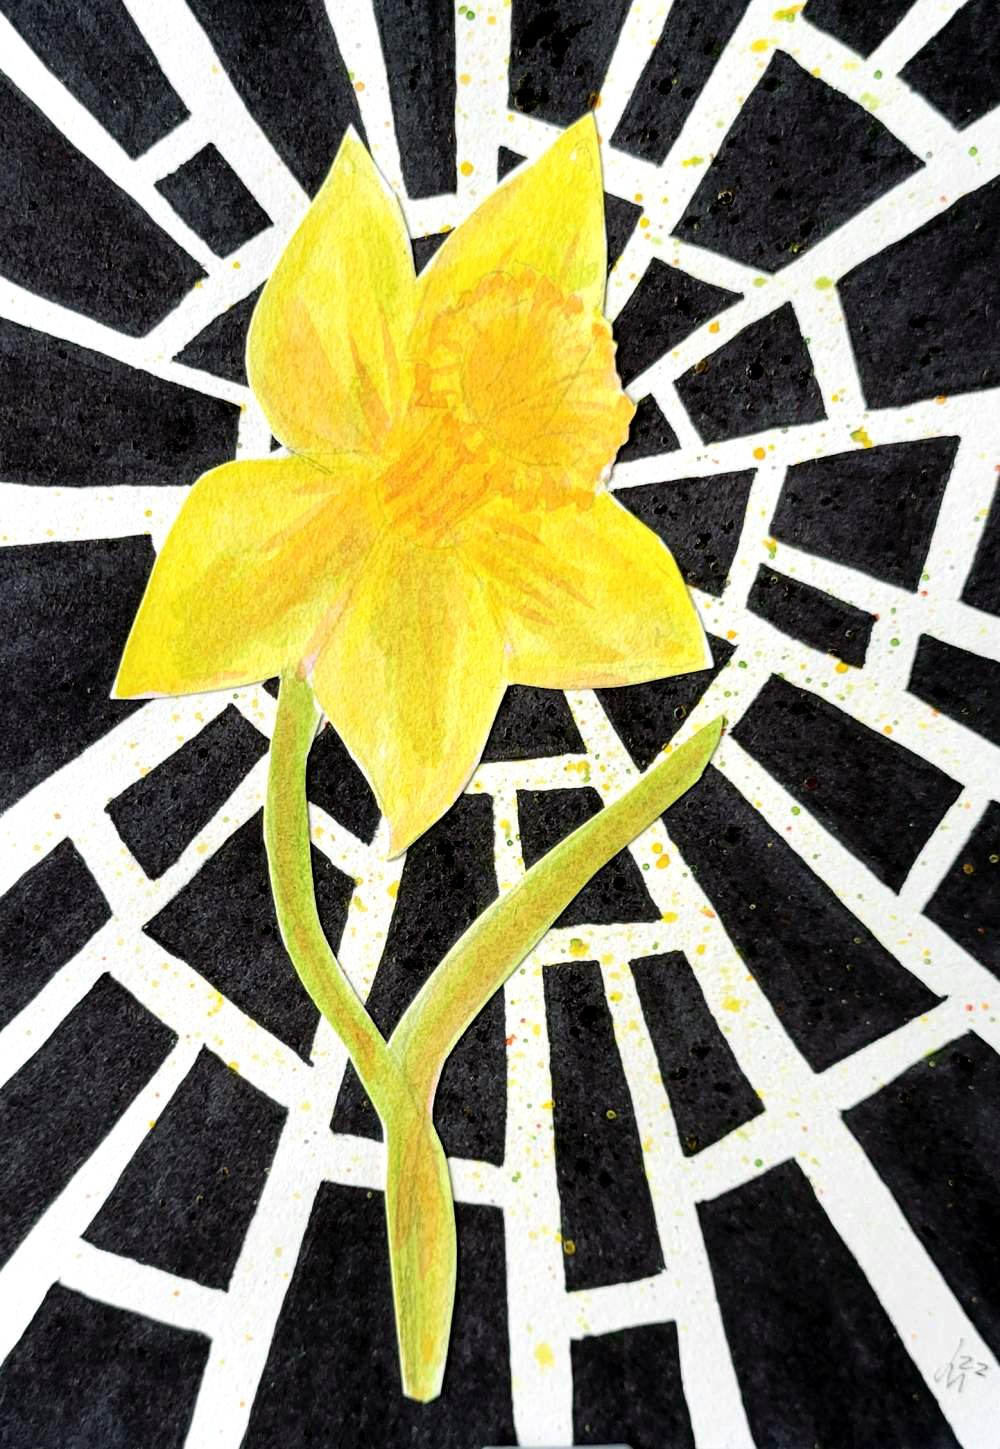 A painting of a daffodil on a shattered background